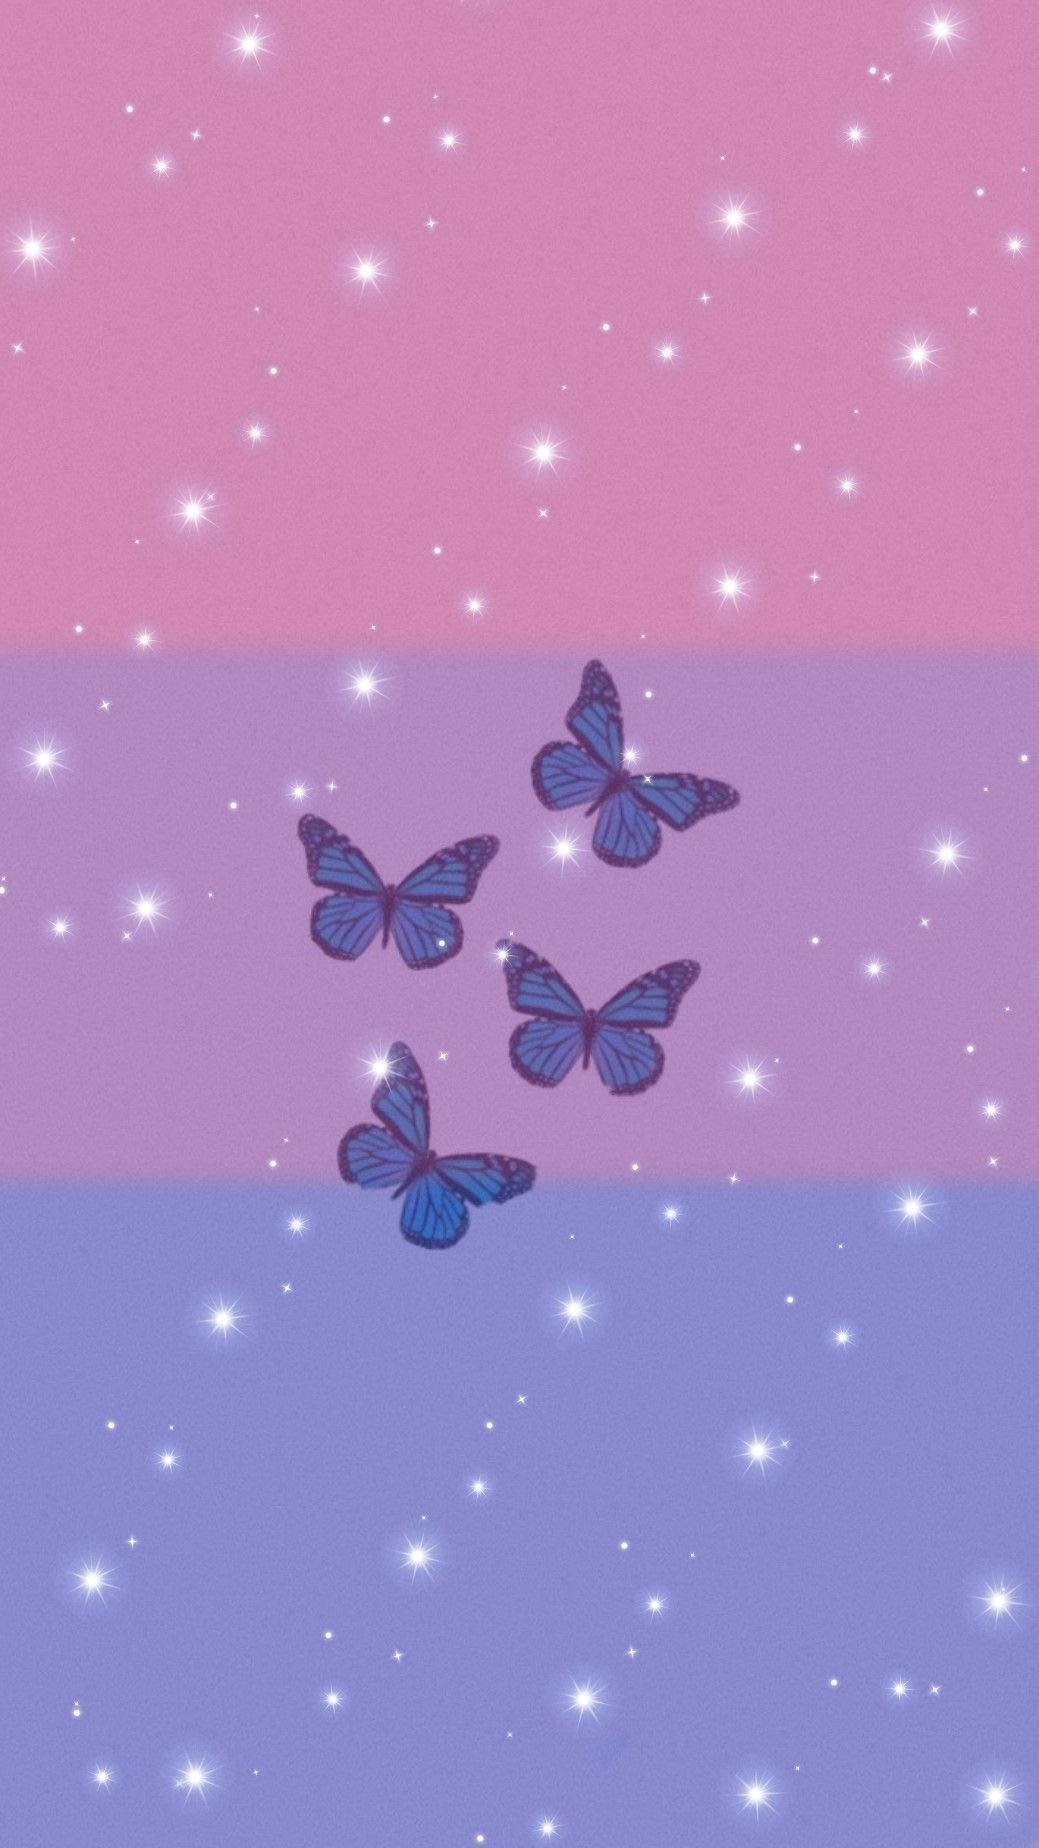 Bisexual Flag With Butterflies - Unity In Diversity Background